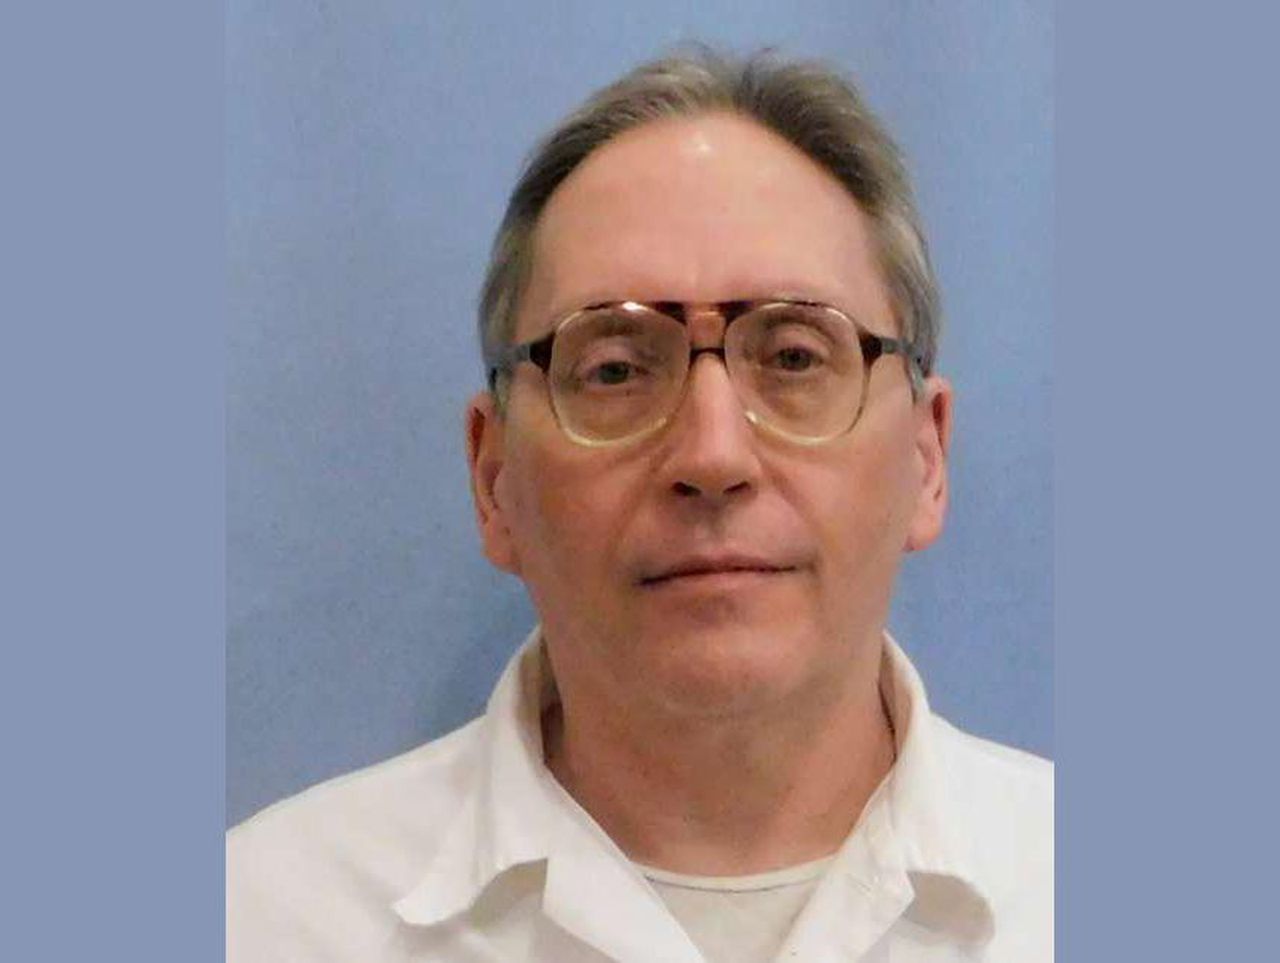 Execution set for man convicted in fatal beating of 75-year-old woman in north Alabama